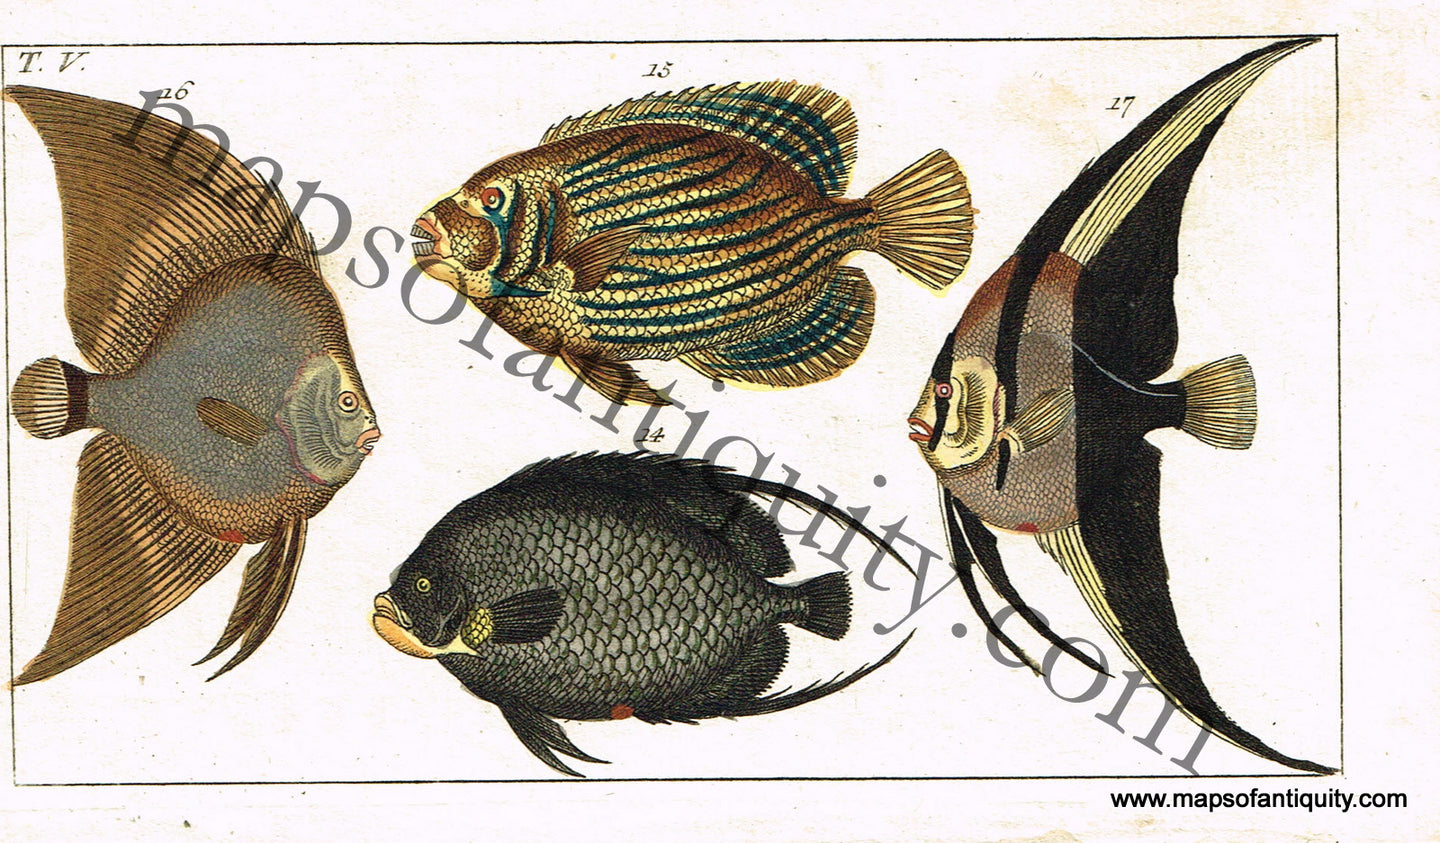 Antique-Hand-Colored-Engraved-Illustration-Angel-Fish-Natural-History-Prints-Fish-1799-Wilhelm-Maps-Of-Antiquity